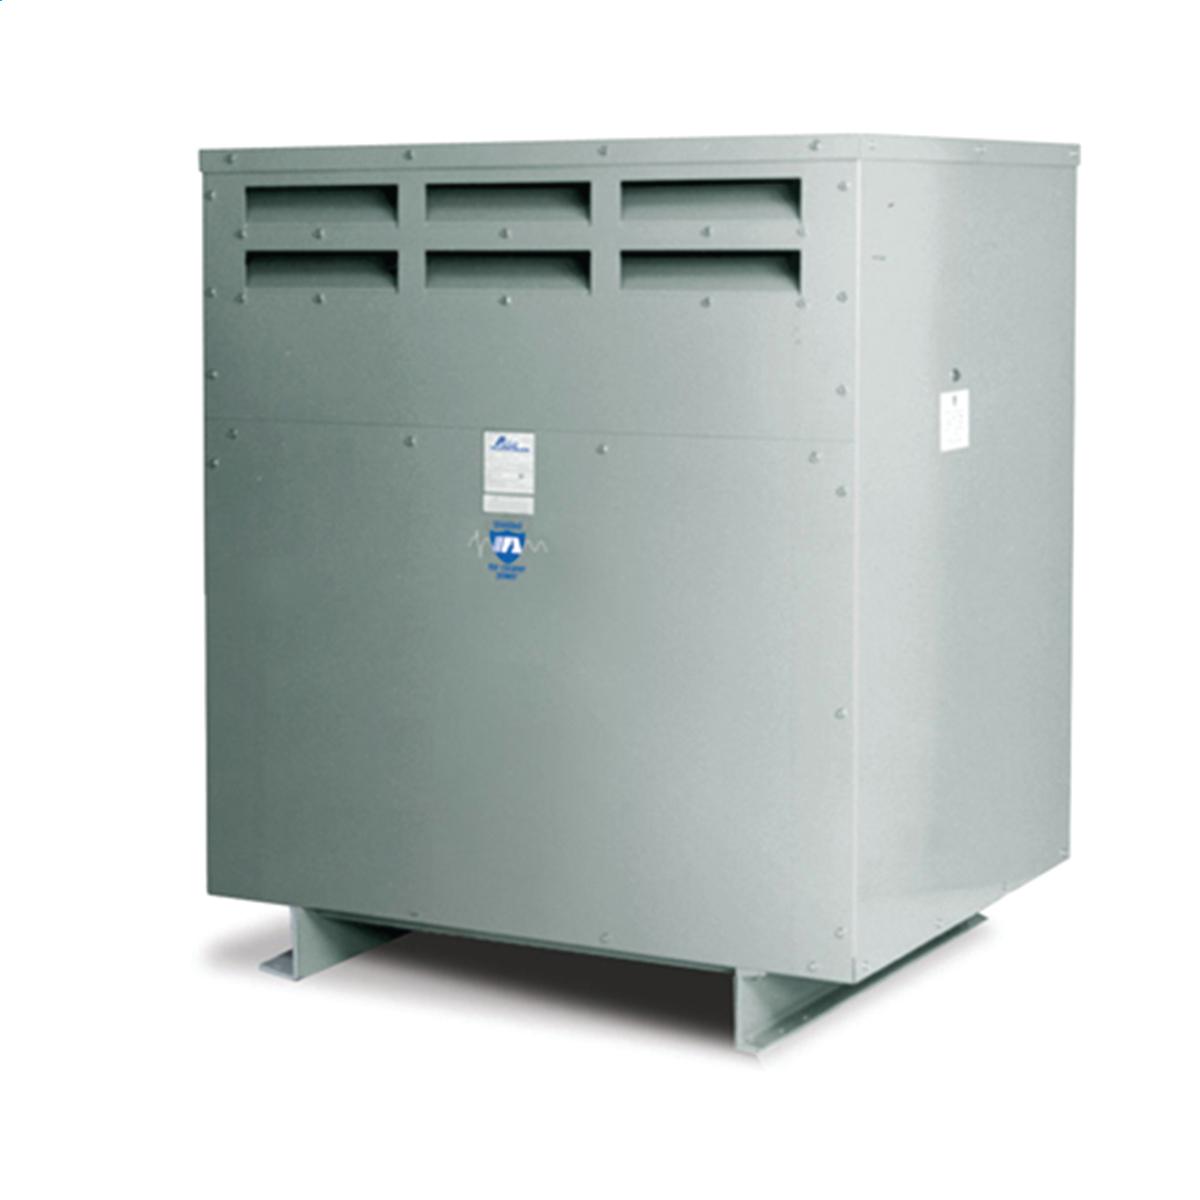 Hubbell WI015M20 Medium Voltage Transformer - Three Phase, 4160Δ - 600ΔV, 1500kVA  ; Lower operating cost over Liquid-filled ; No additional fireproofing or venting ; Long life expectancy ; Smaller, lighter easy to maintain